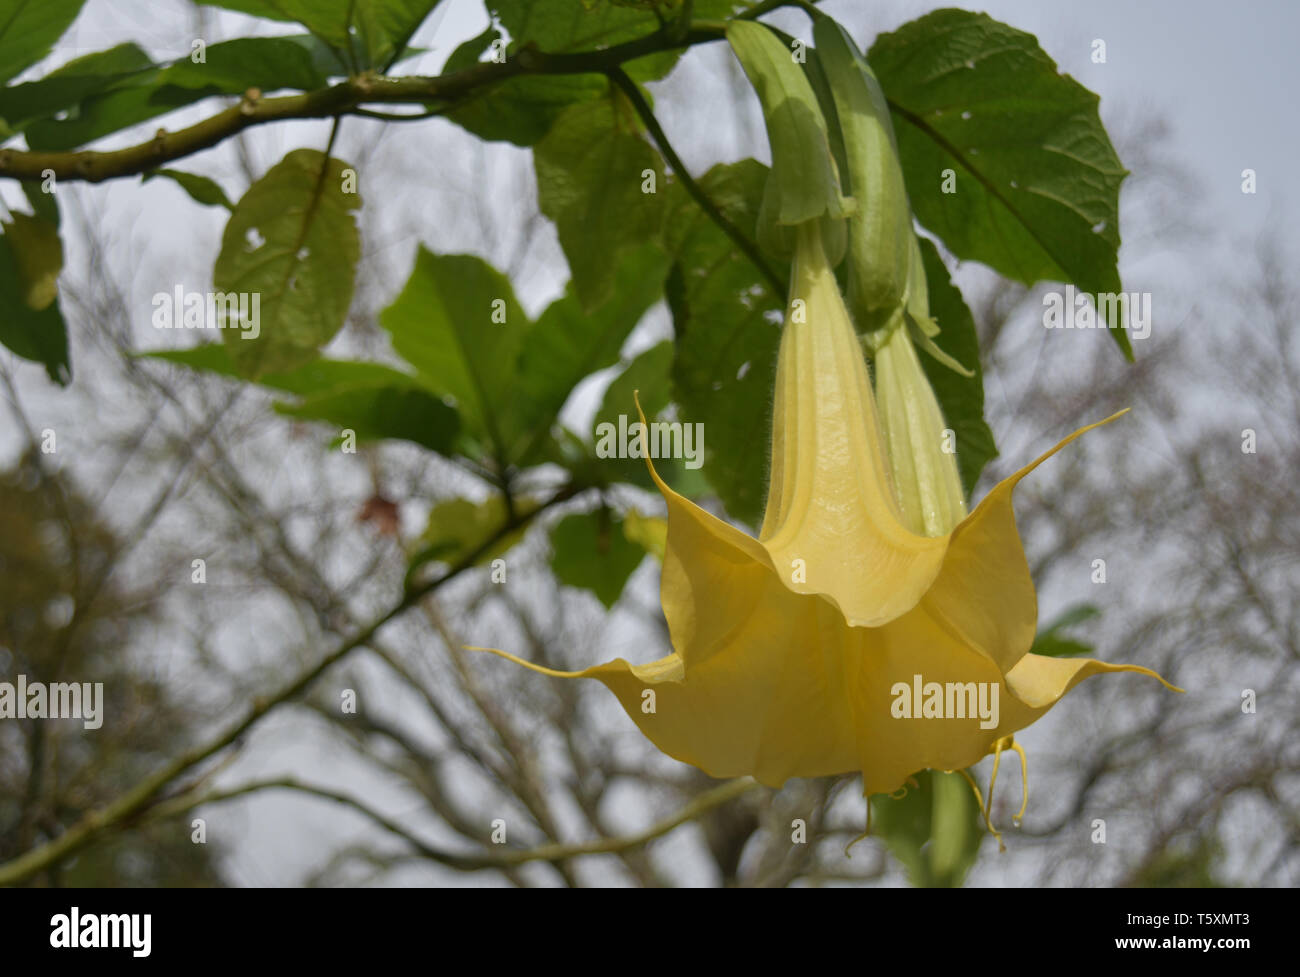 Very pretty yellow angel's trumpet flowers blooming on a vine. Stock Photo